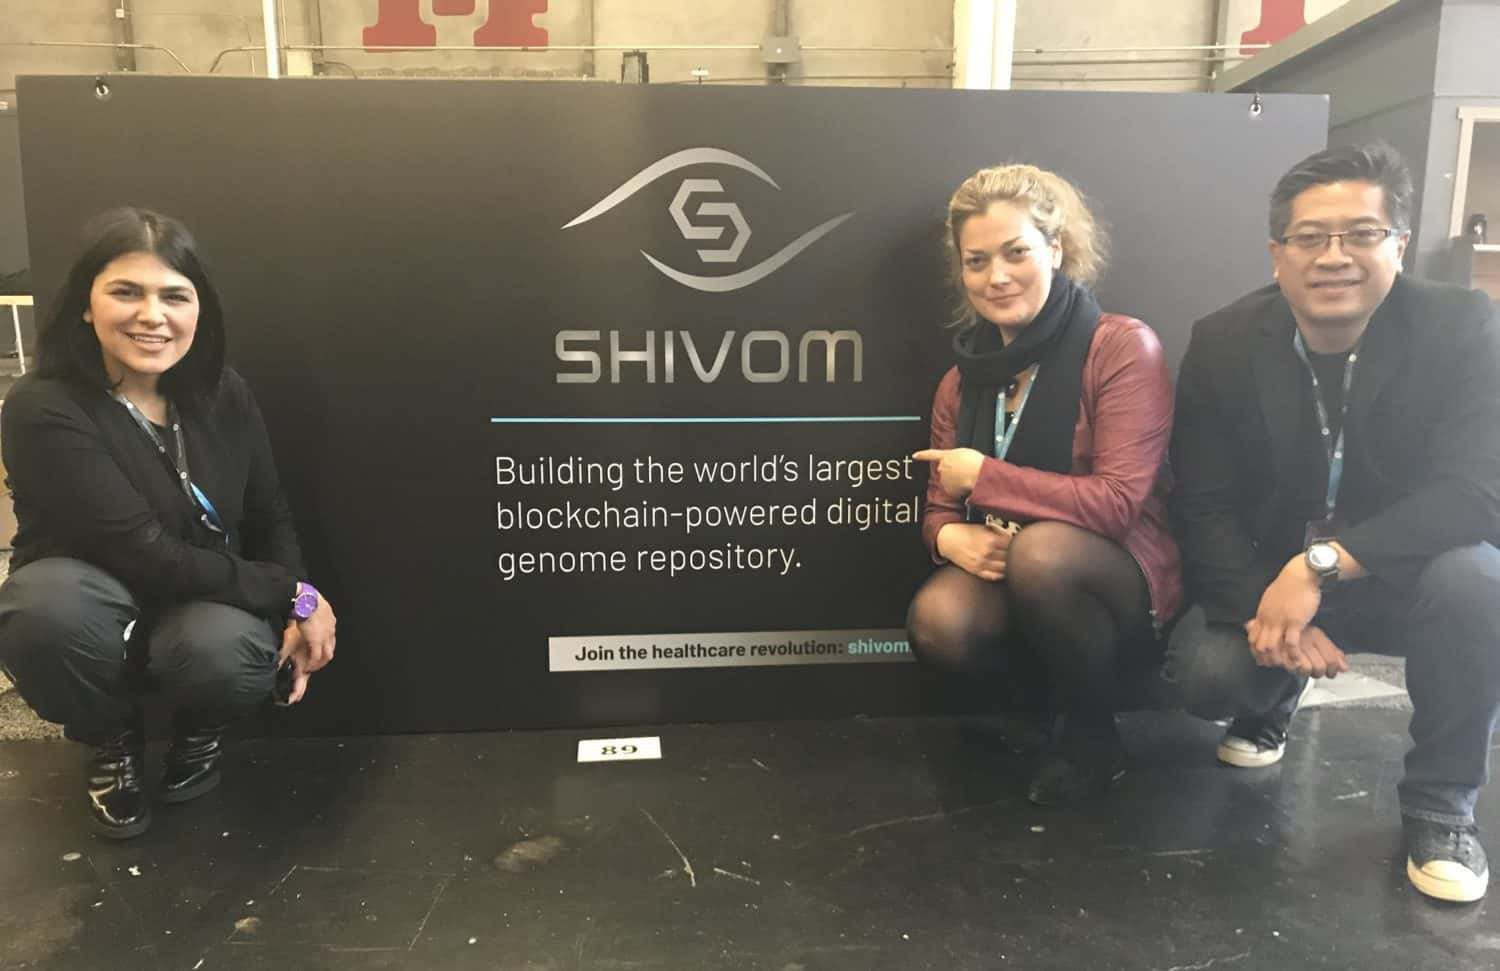 Azam Shaghaghi, Henry Ines and Natalie Pankova from the Shivom team, attending Token Fest. Source: twitter.com/ProjectShivom